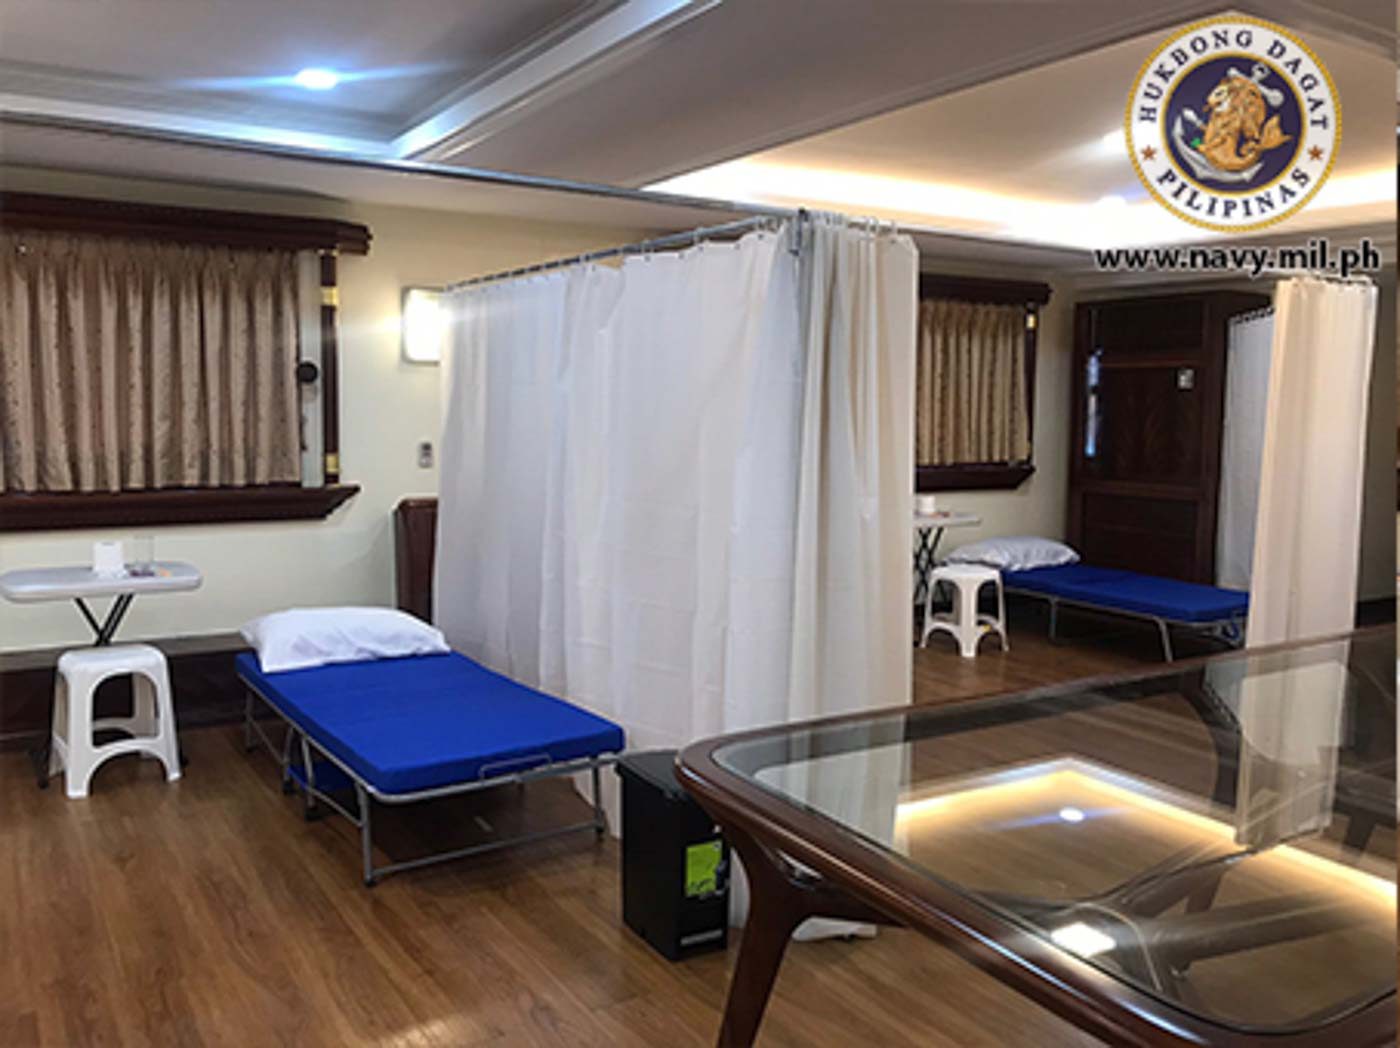 LOOK: Philippines’ presidential yacht set to take in coronavirus patients